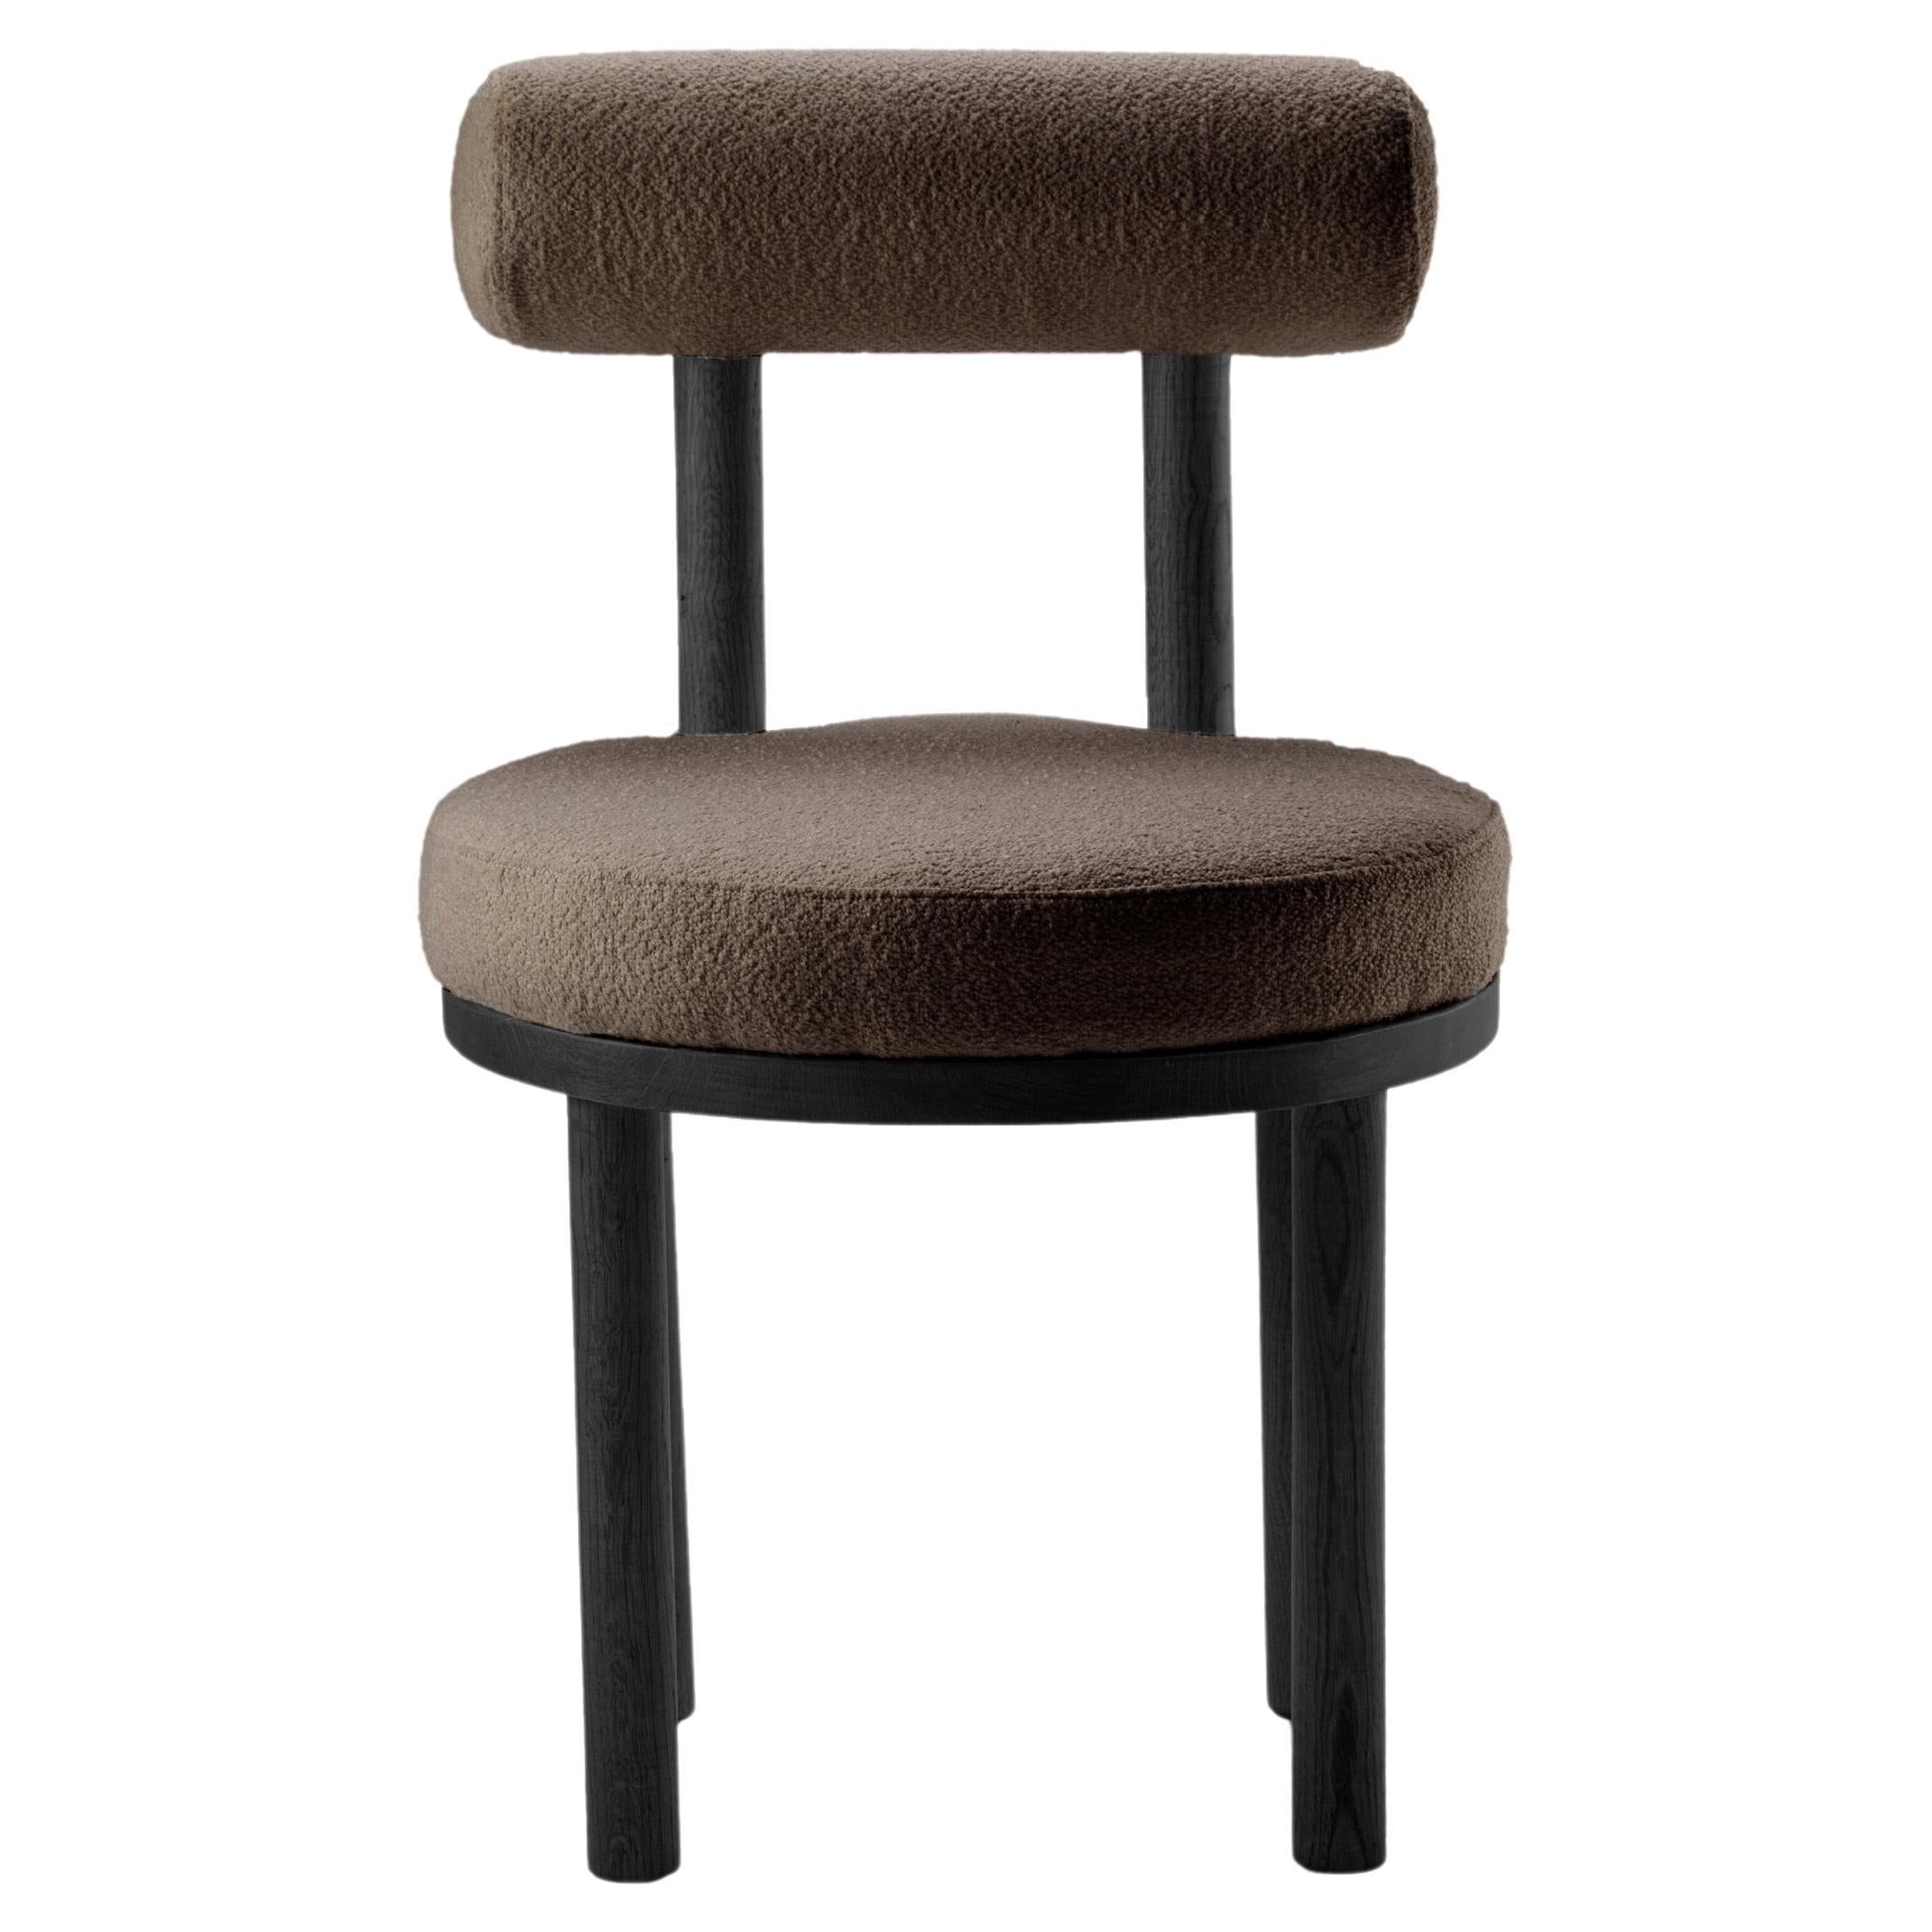 Contemporary Modern Moca Chair in Gila Smoke Fabric & Black Oak by Collector For Sale